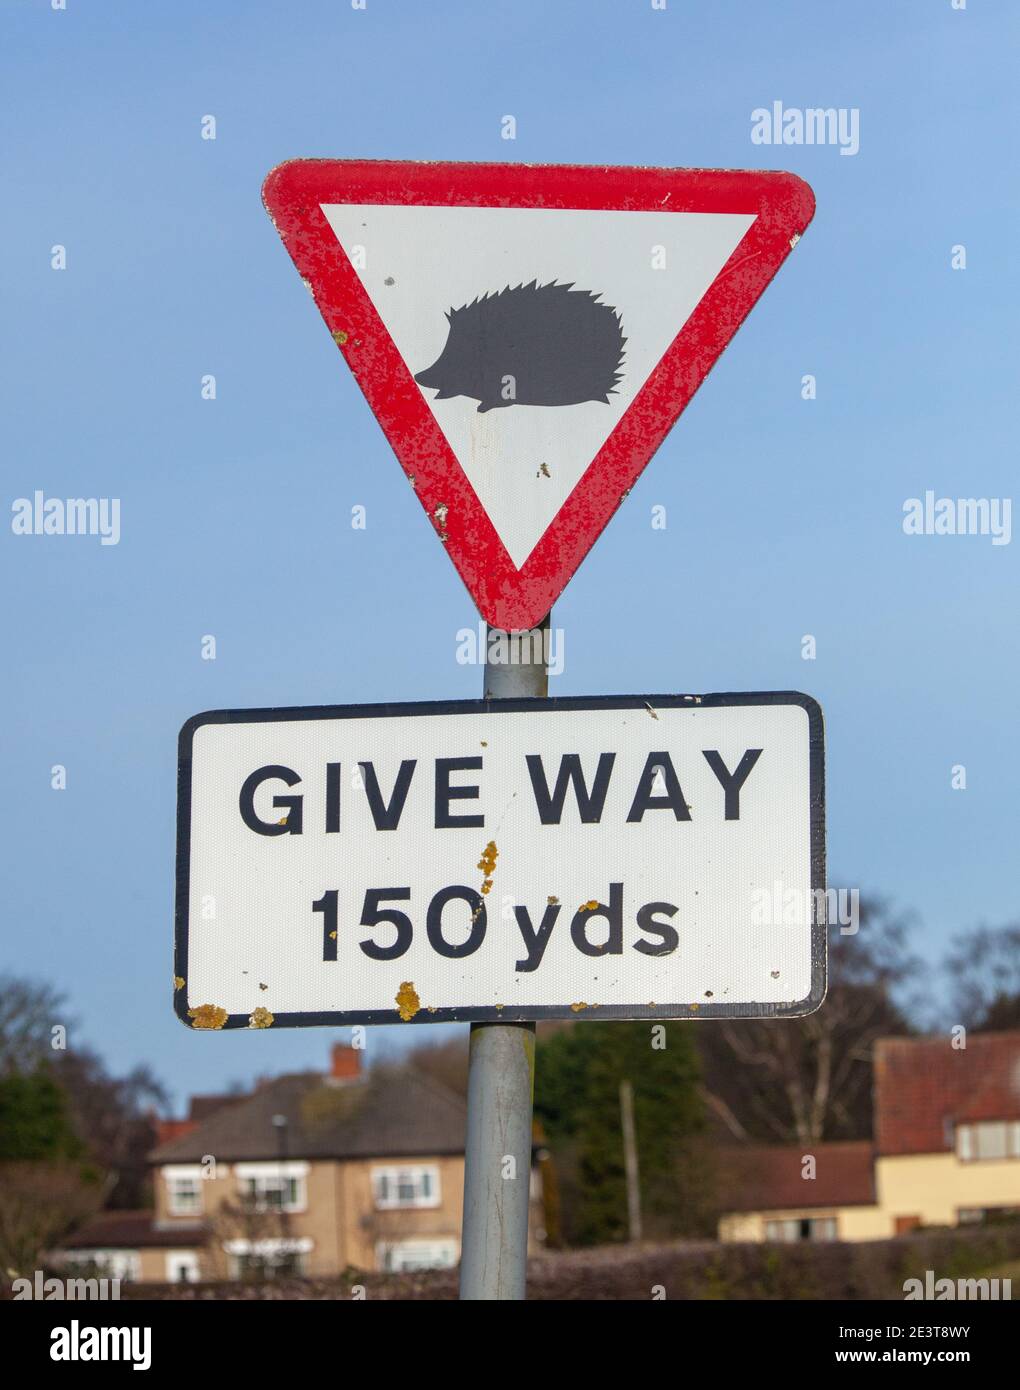 Red triangle give way warning sign marked with a black hedgehog sticker Stock Photo